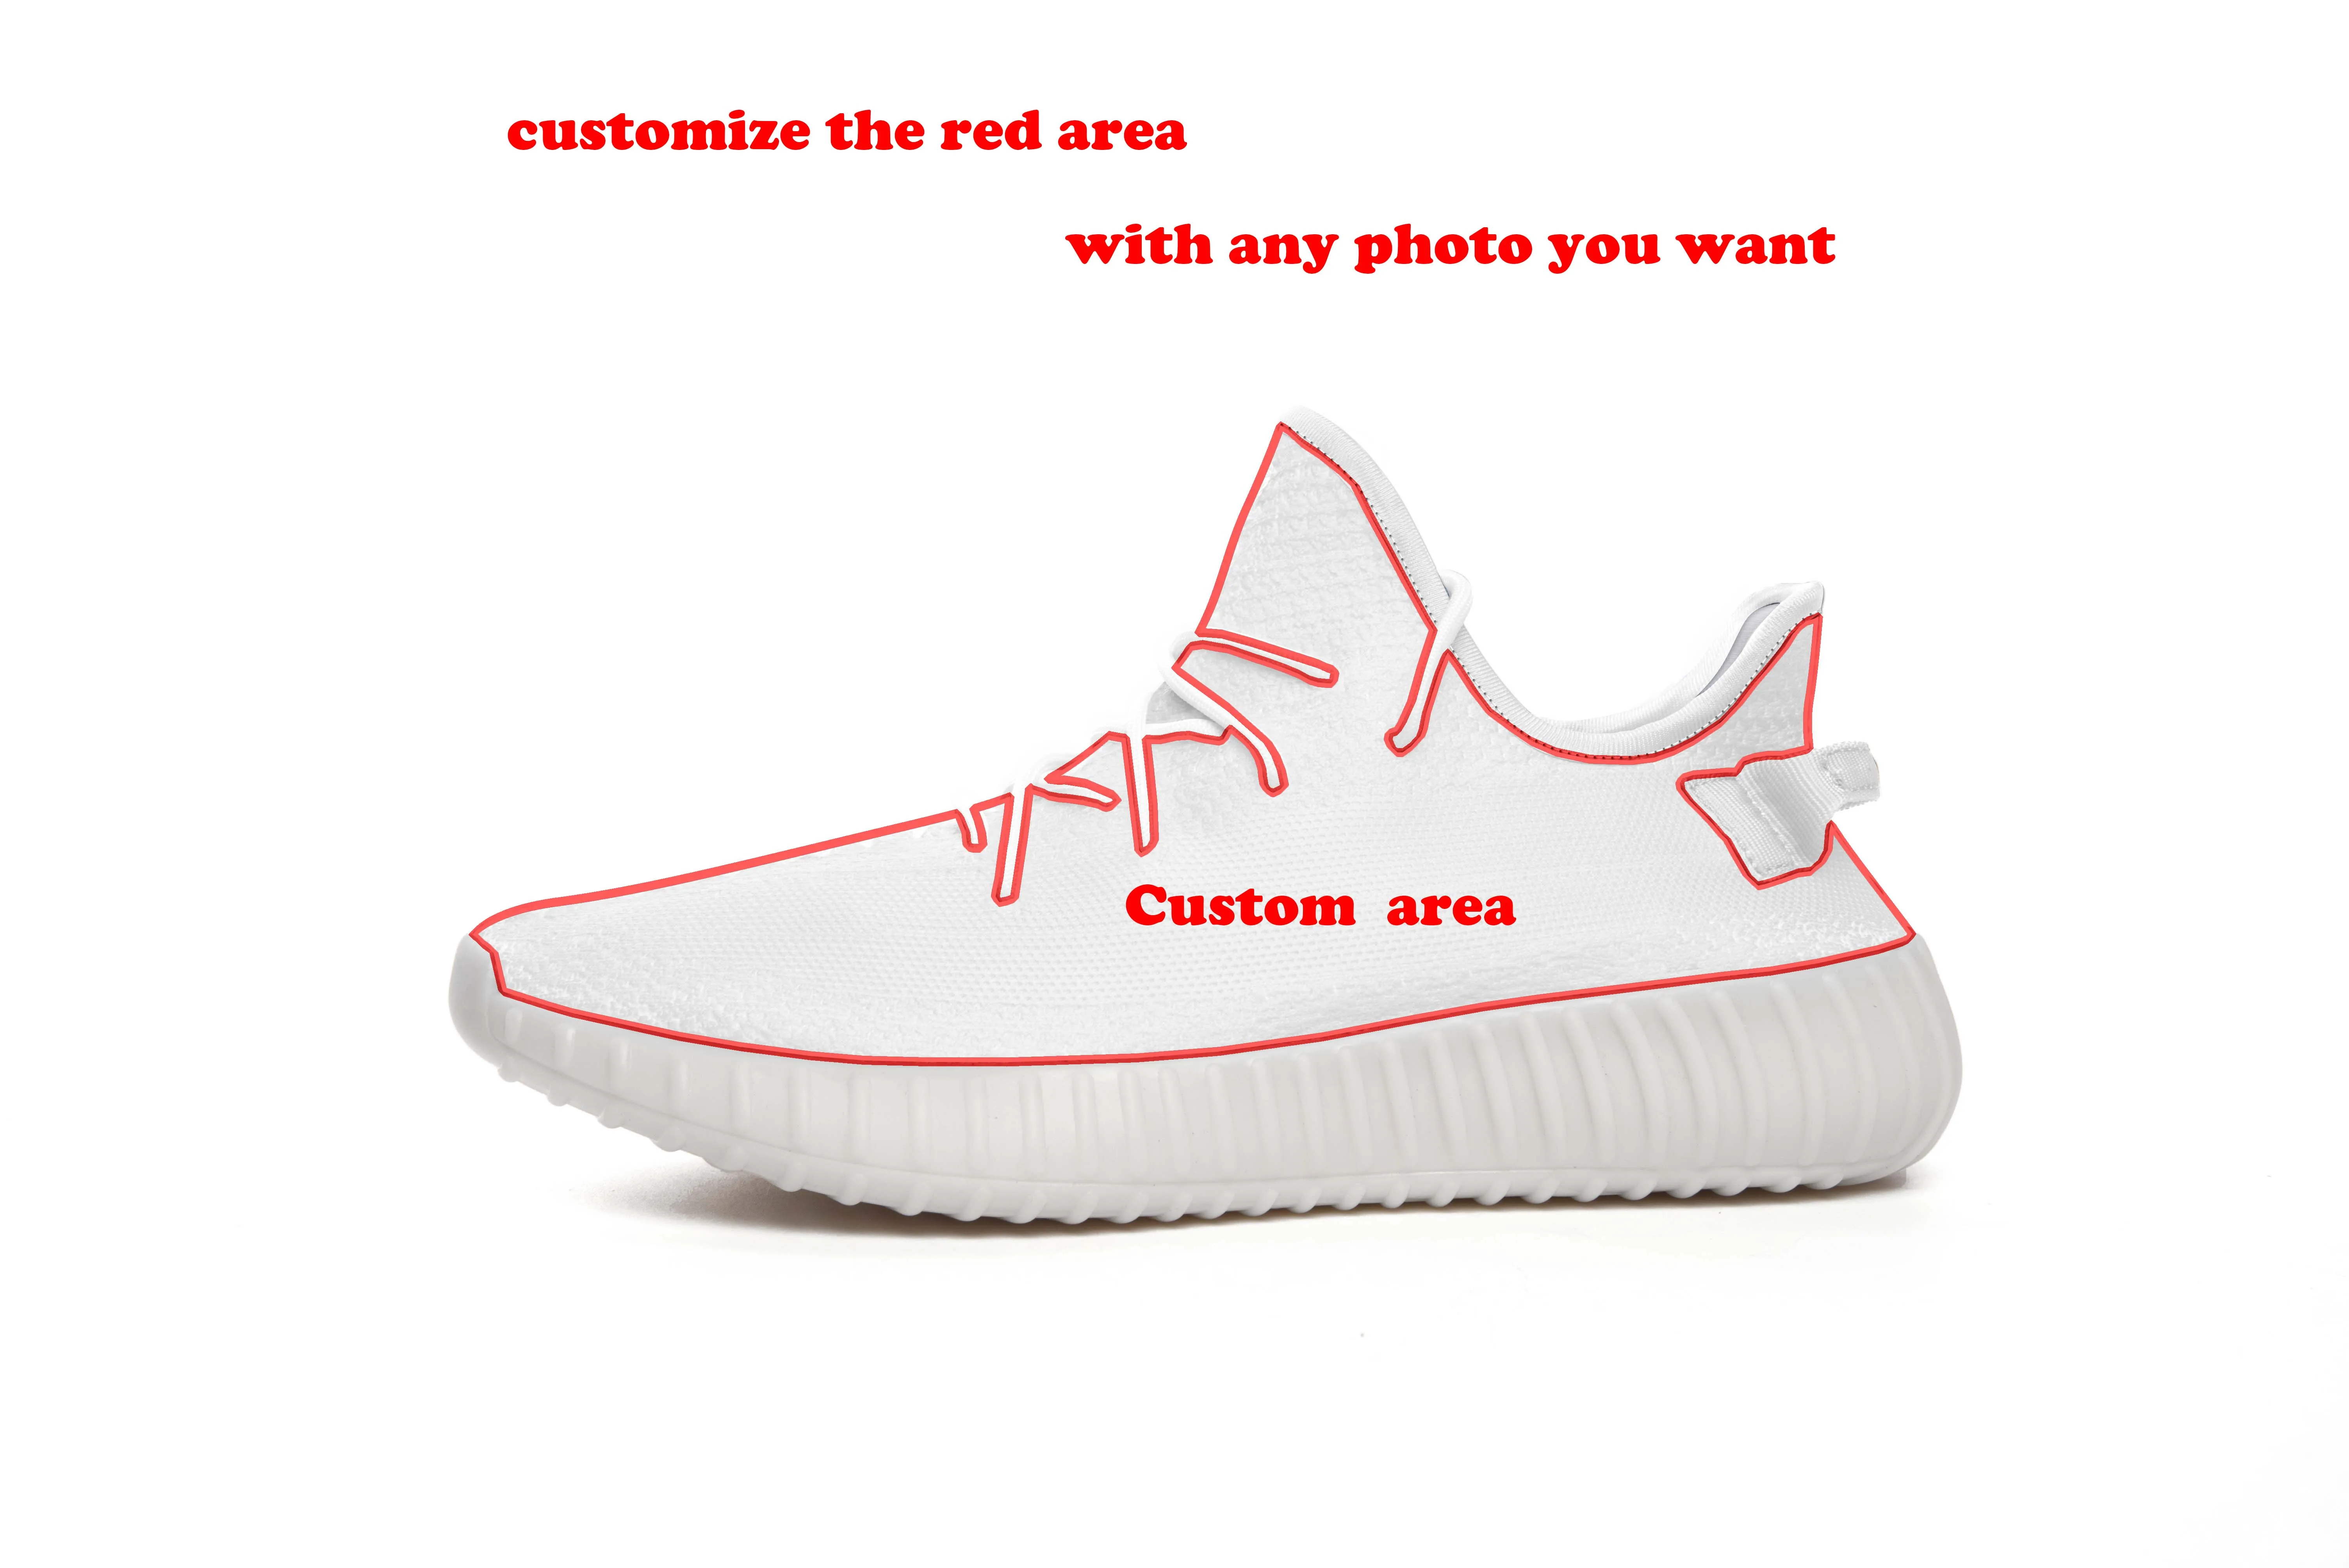 

2019 hot fashion Taylor lautner 3D casual shoes for men/women high quality 3D printing Taylor lautner Sneakers